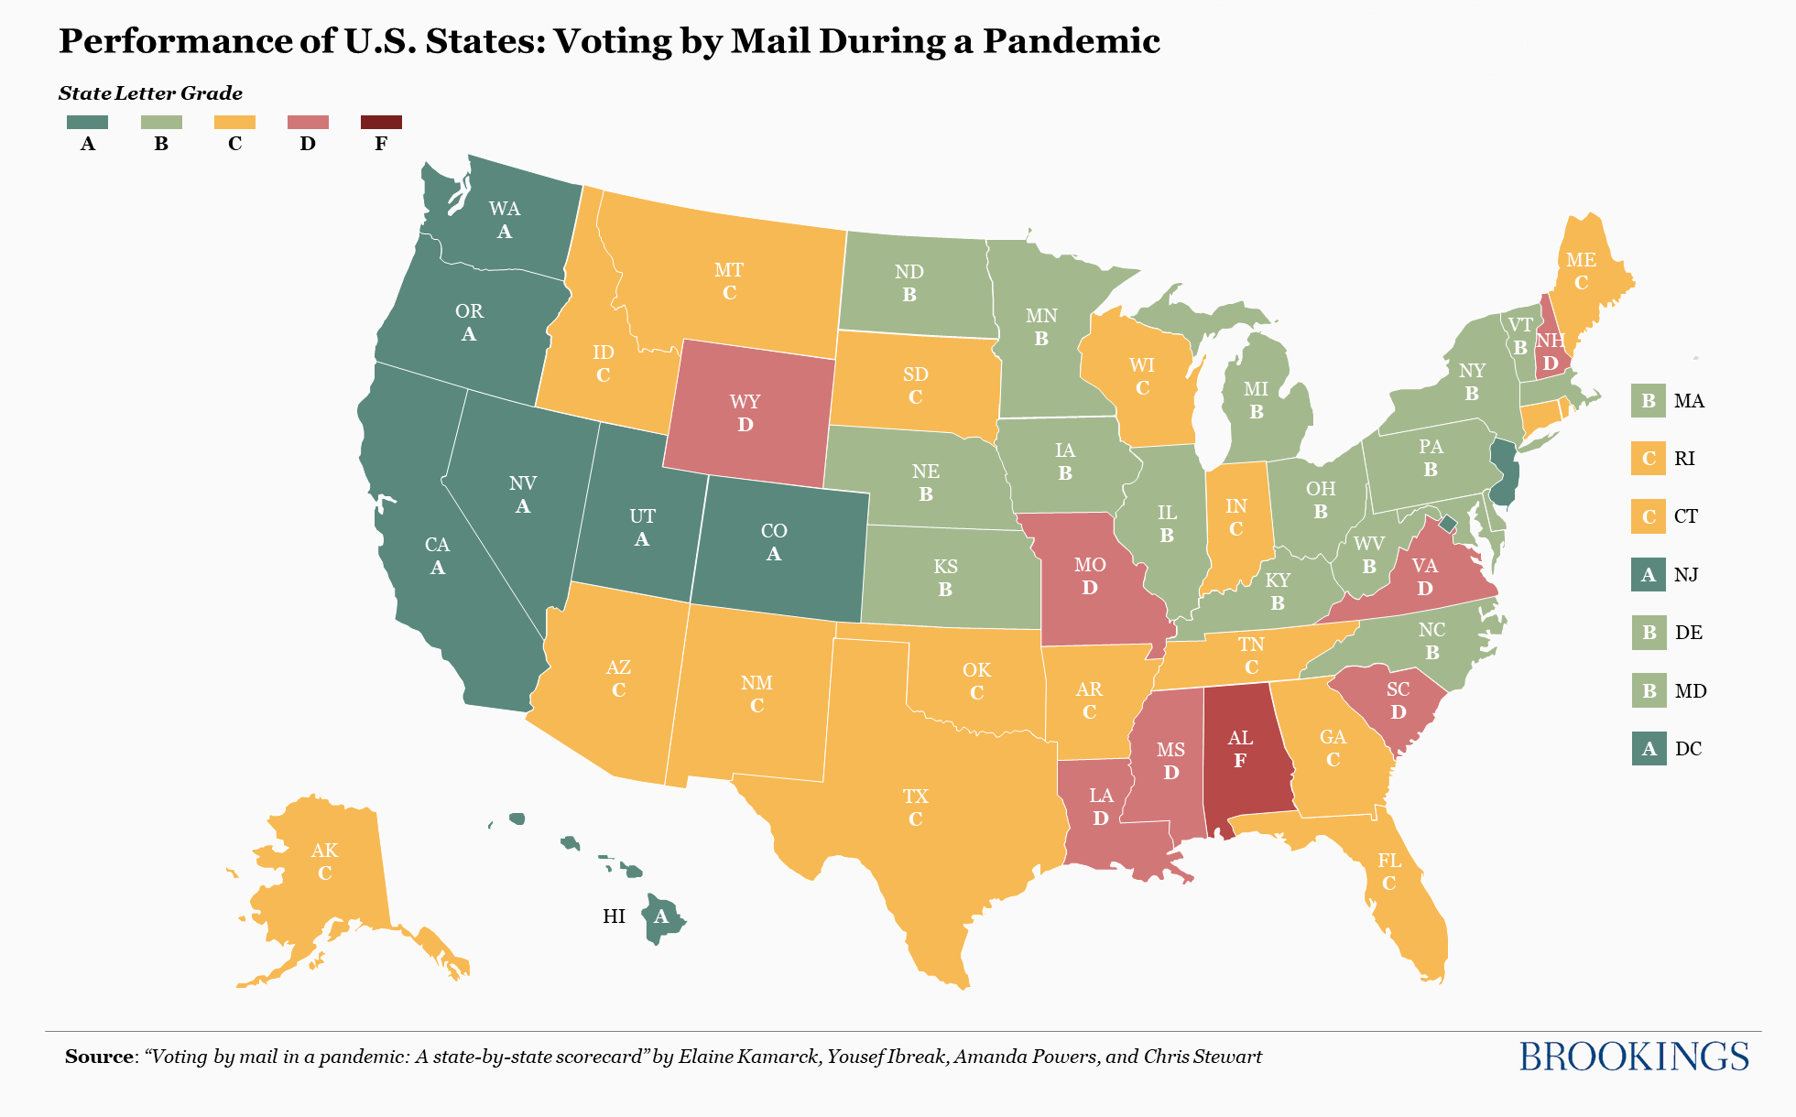 Voting by mail in a pandemic: A state-by-state scorecard